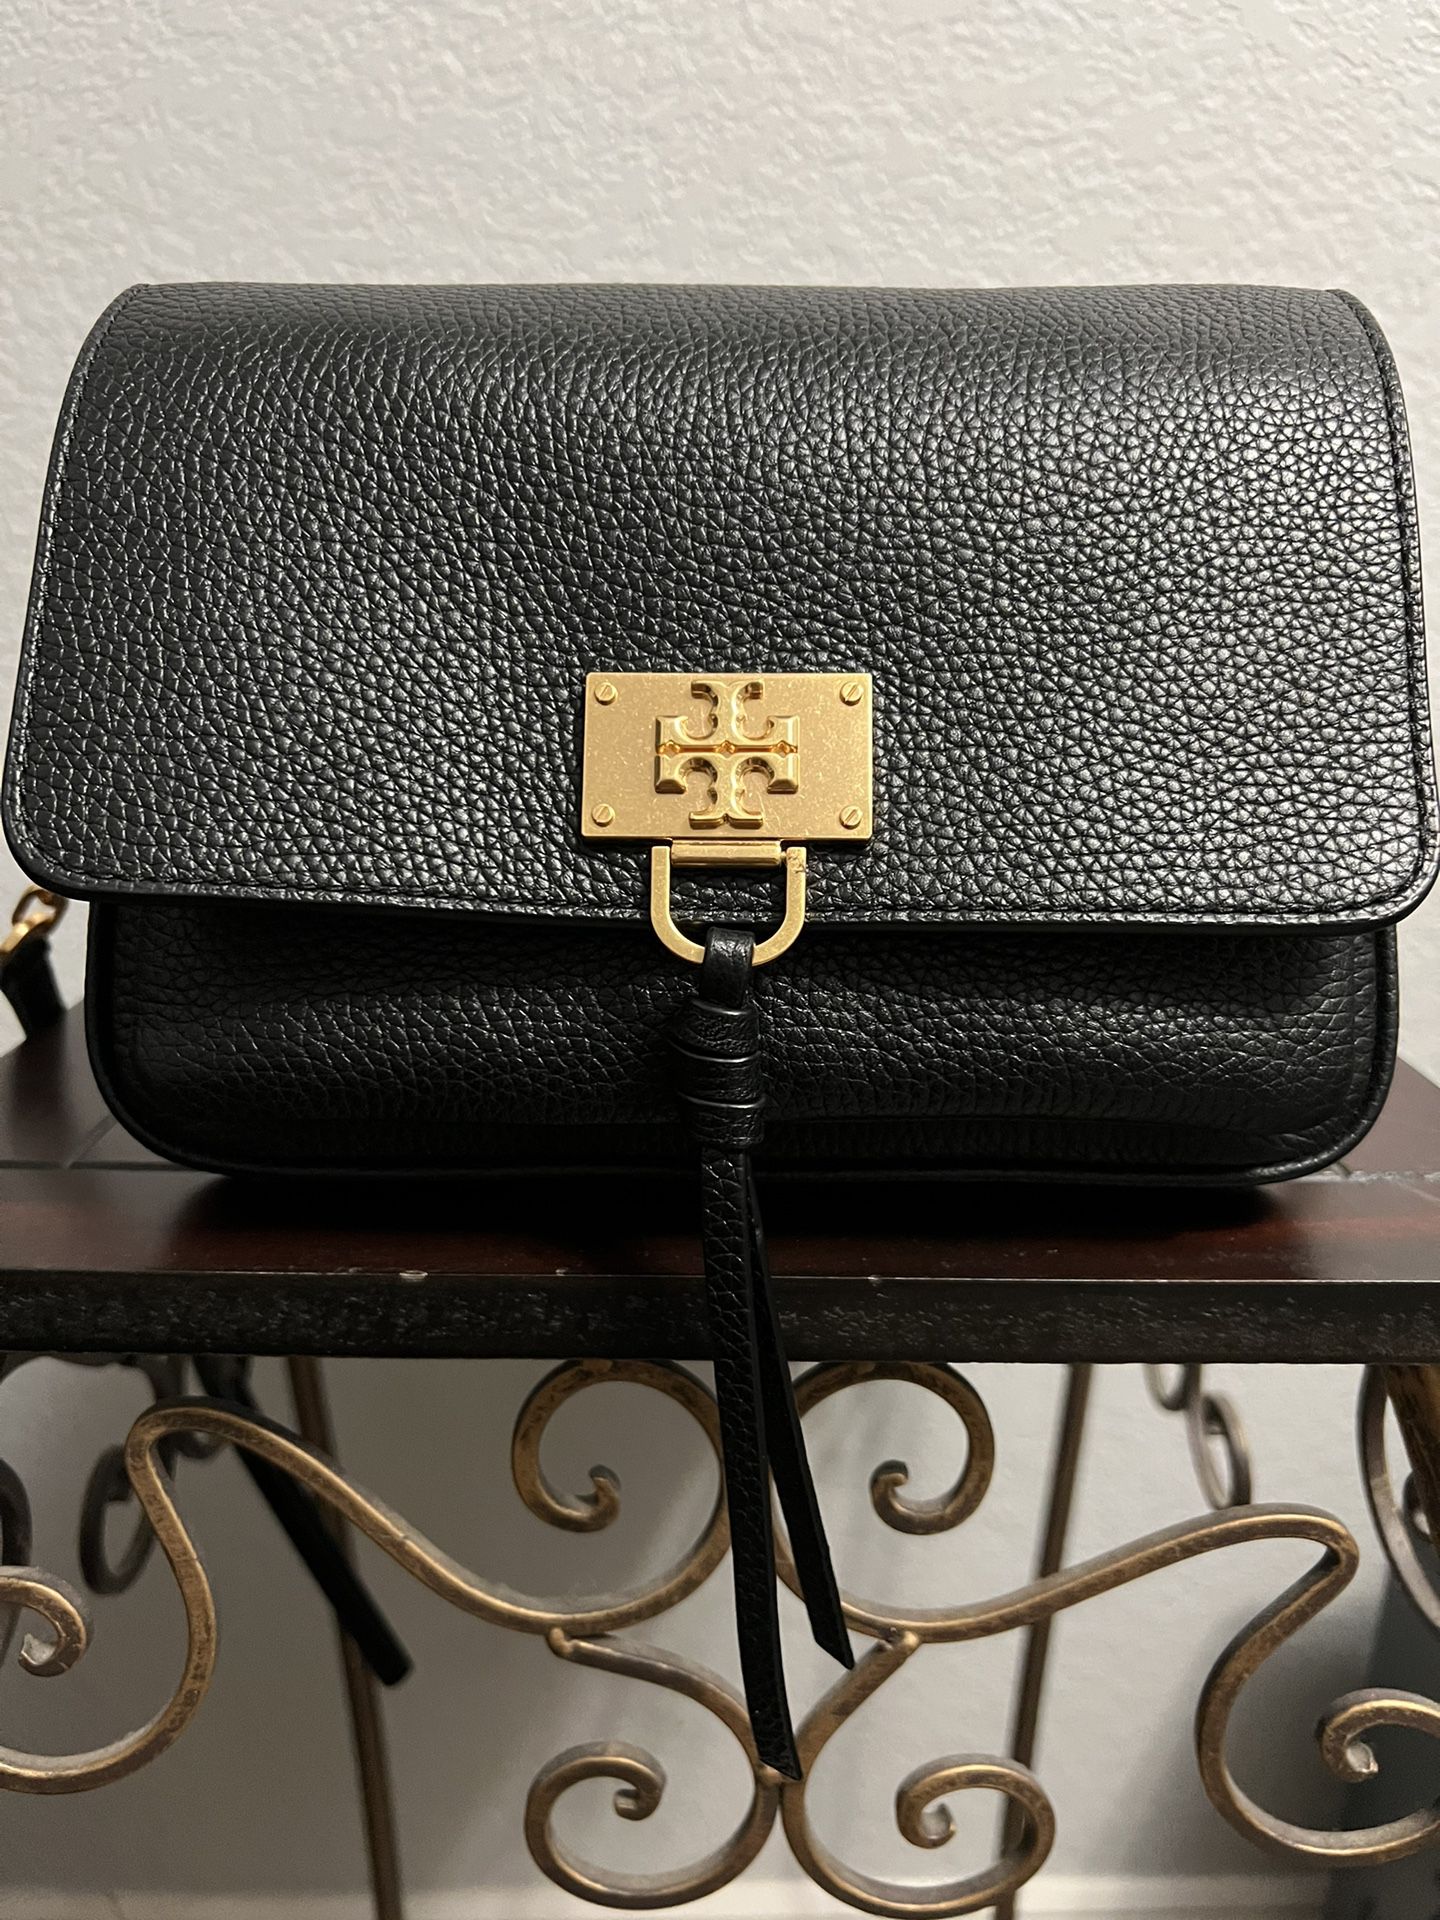 Tory Burch Leather Crossbody Bag!!! for Sale in Stockton, CA - OfferUp